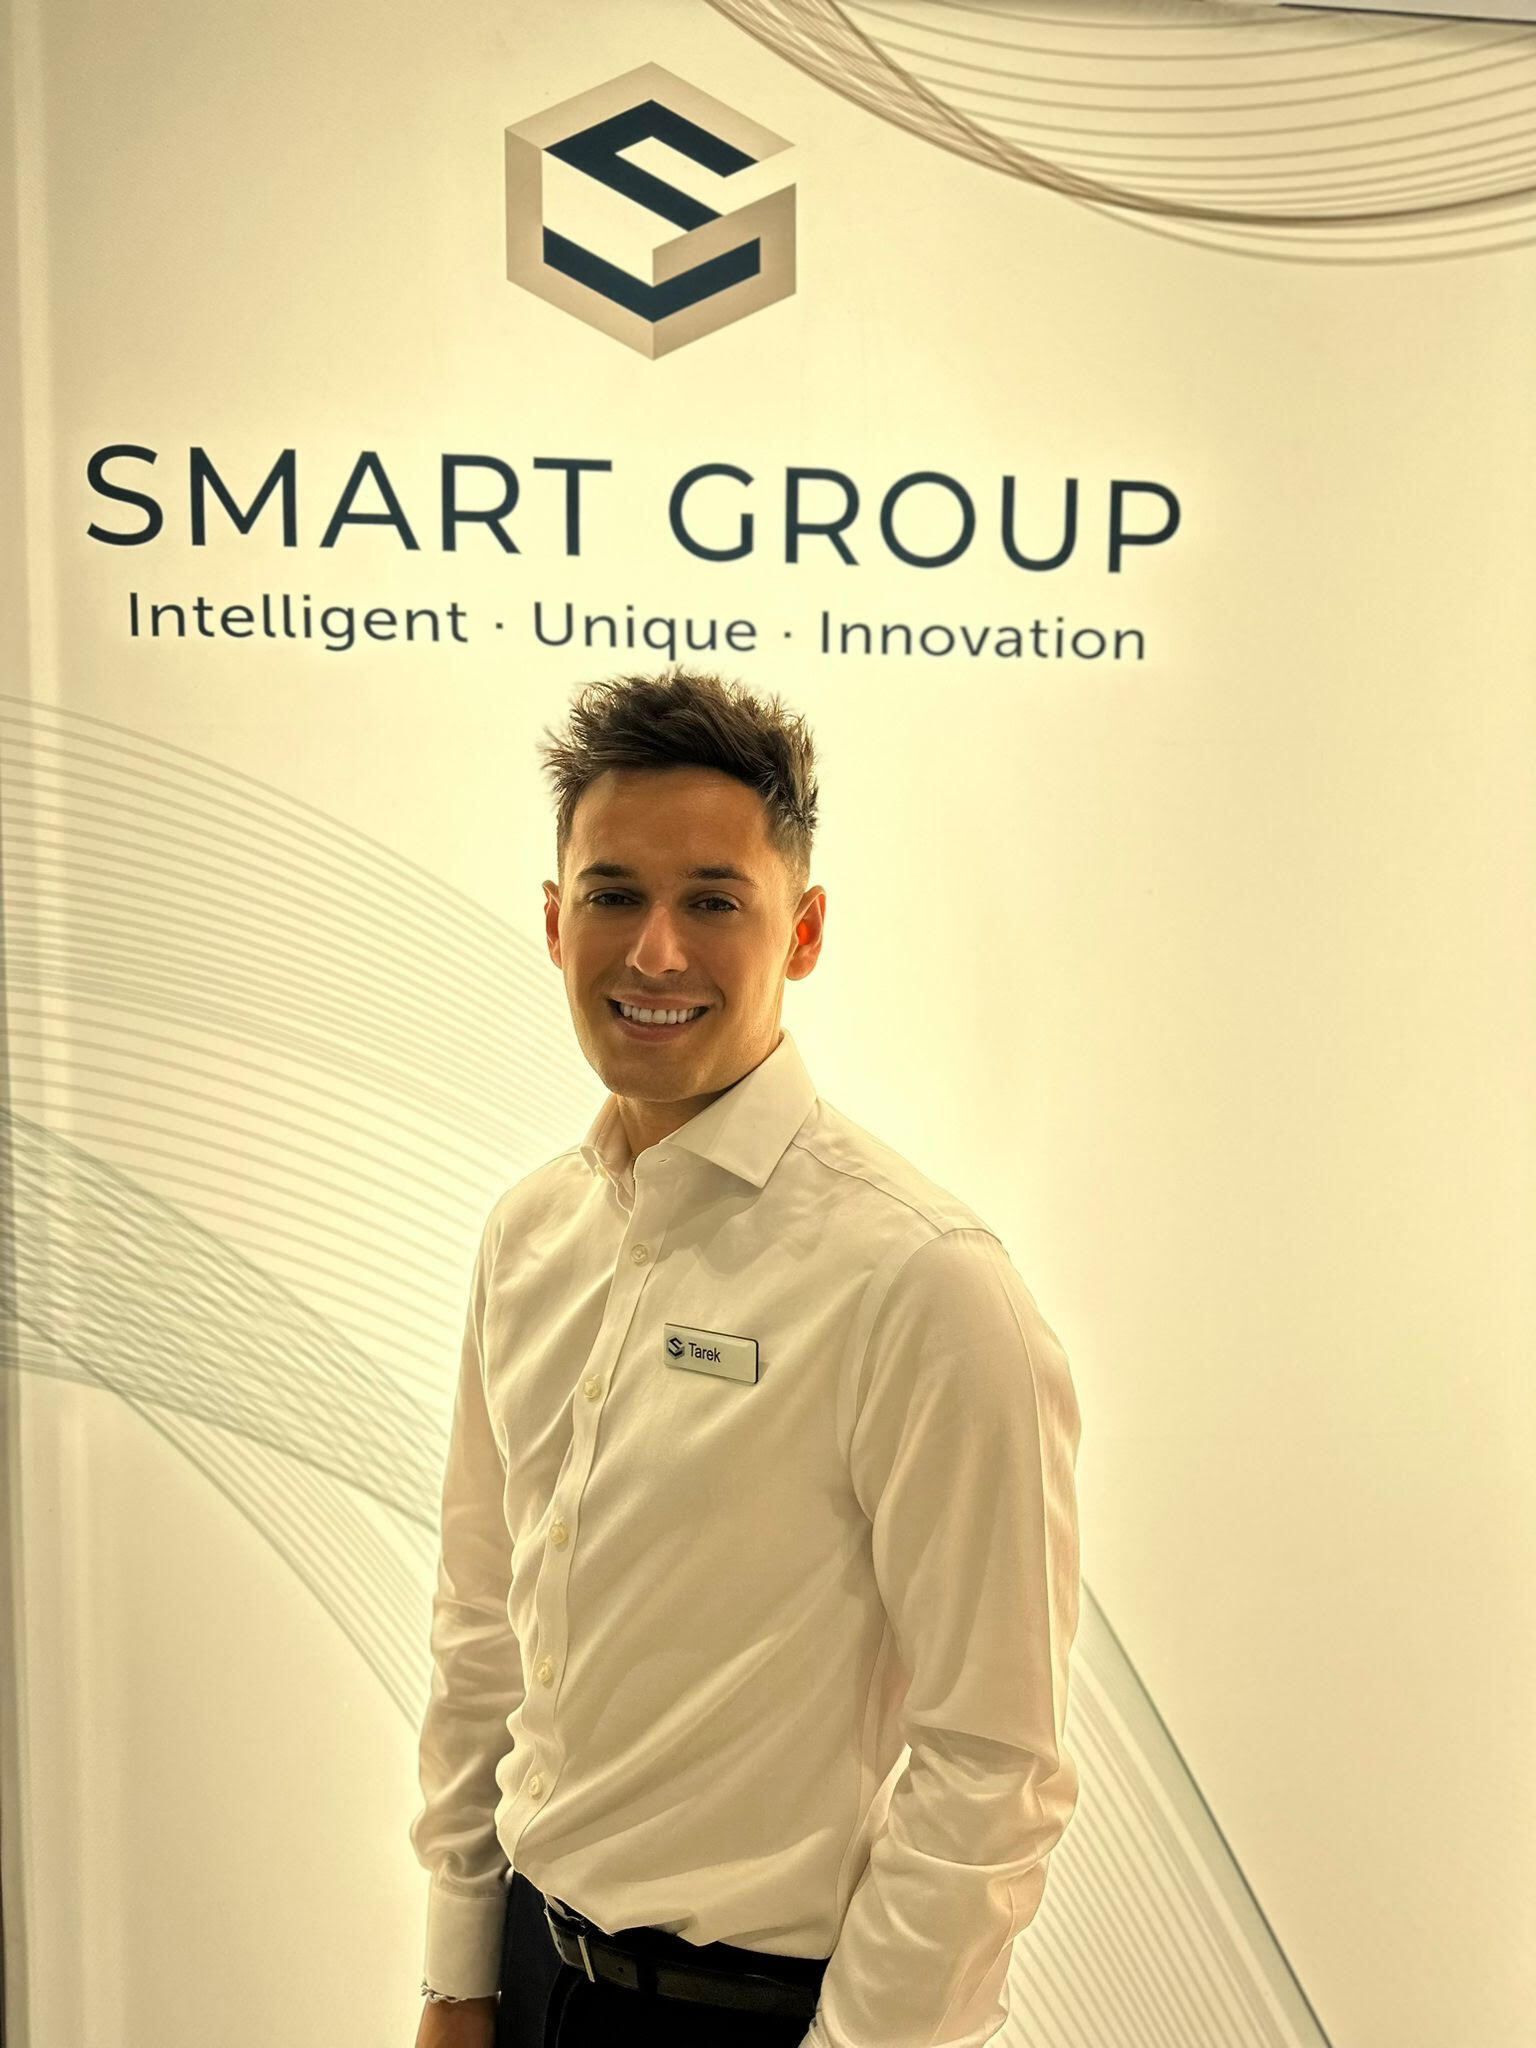 The SMART Group Customer Service